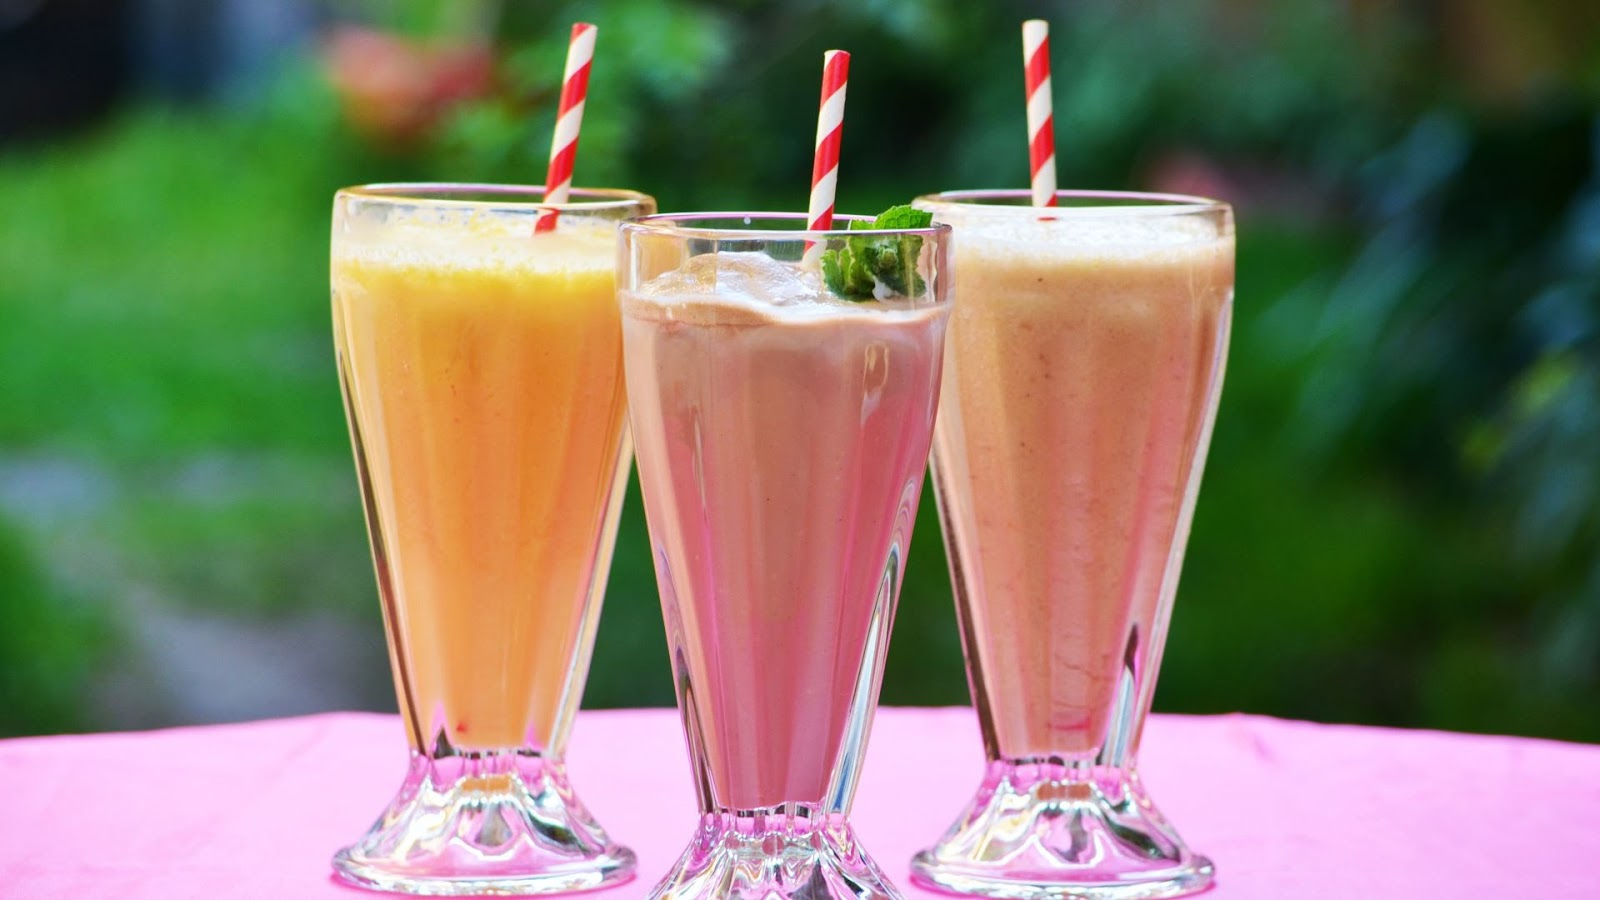 We like a batido because it is like having a milkshake, only with fewer cal...